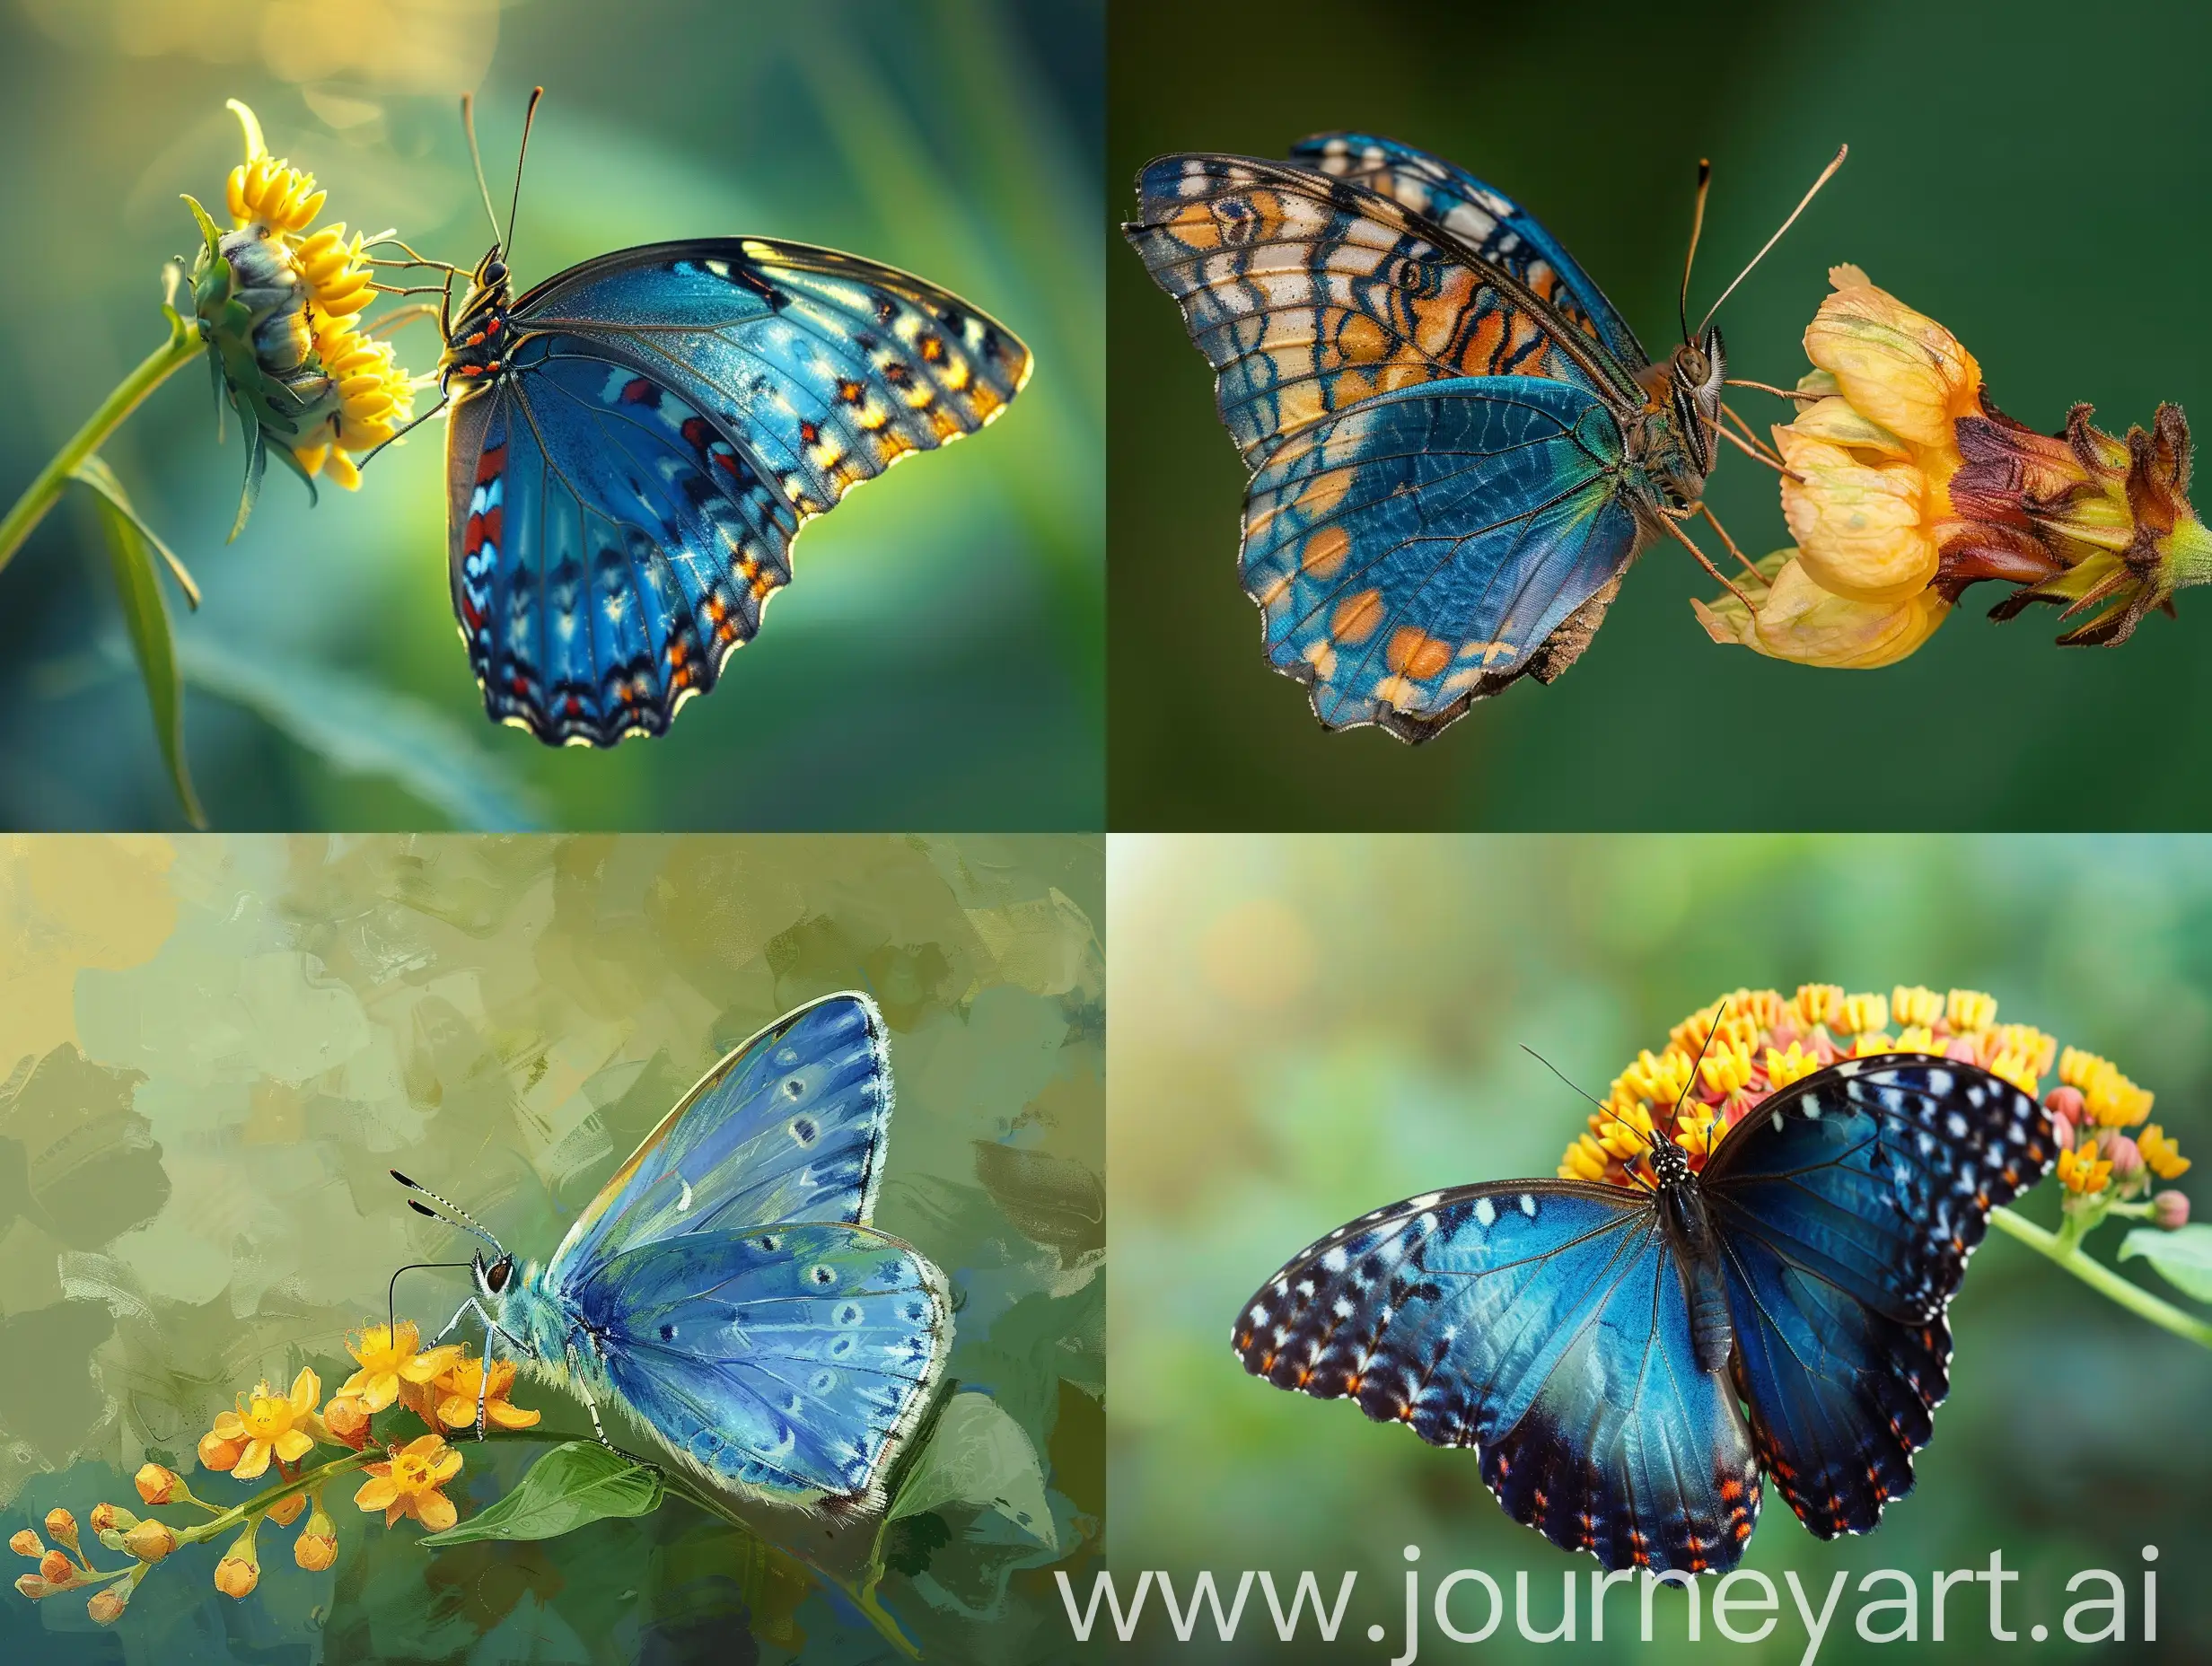 Palo-Verdes-Blue-Butterfly-Resting-on-Delicate-Yellow-Flower-in-Lush-Green-Setting